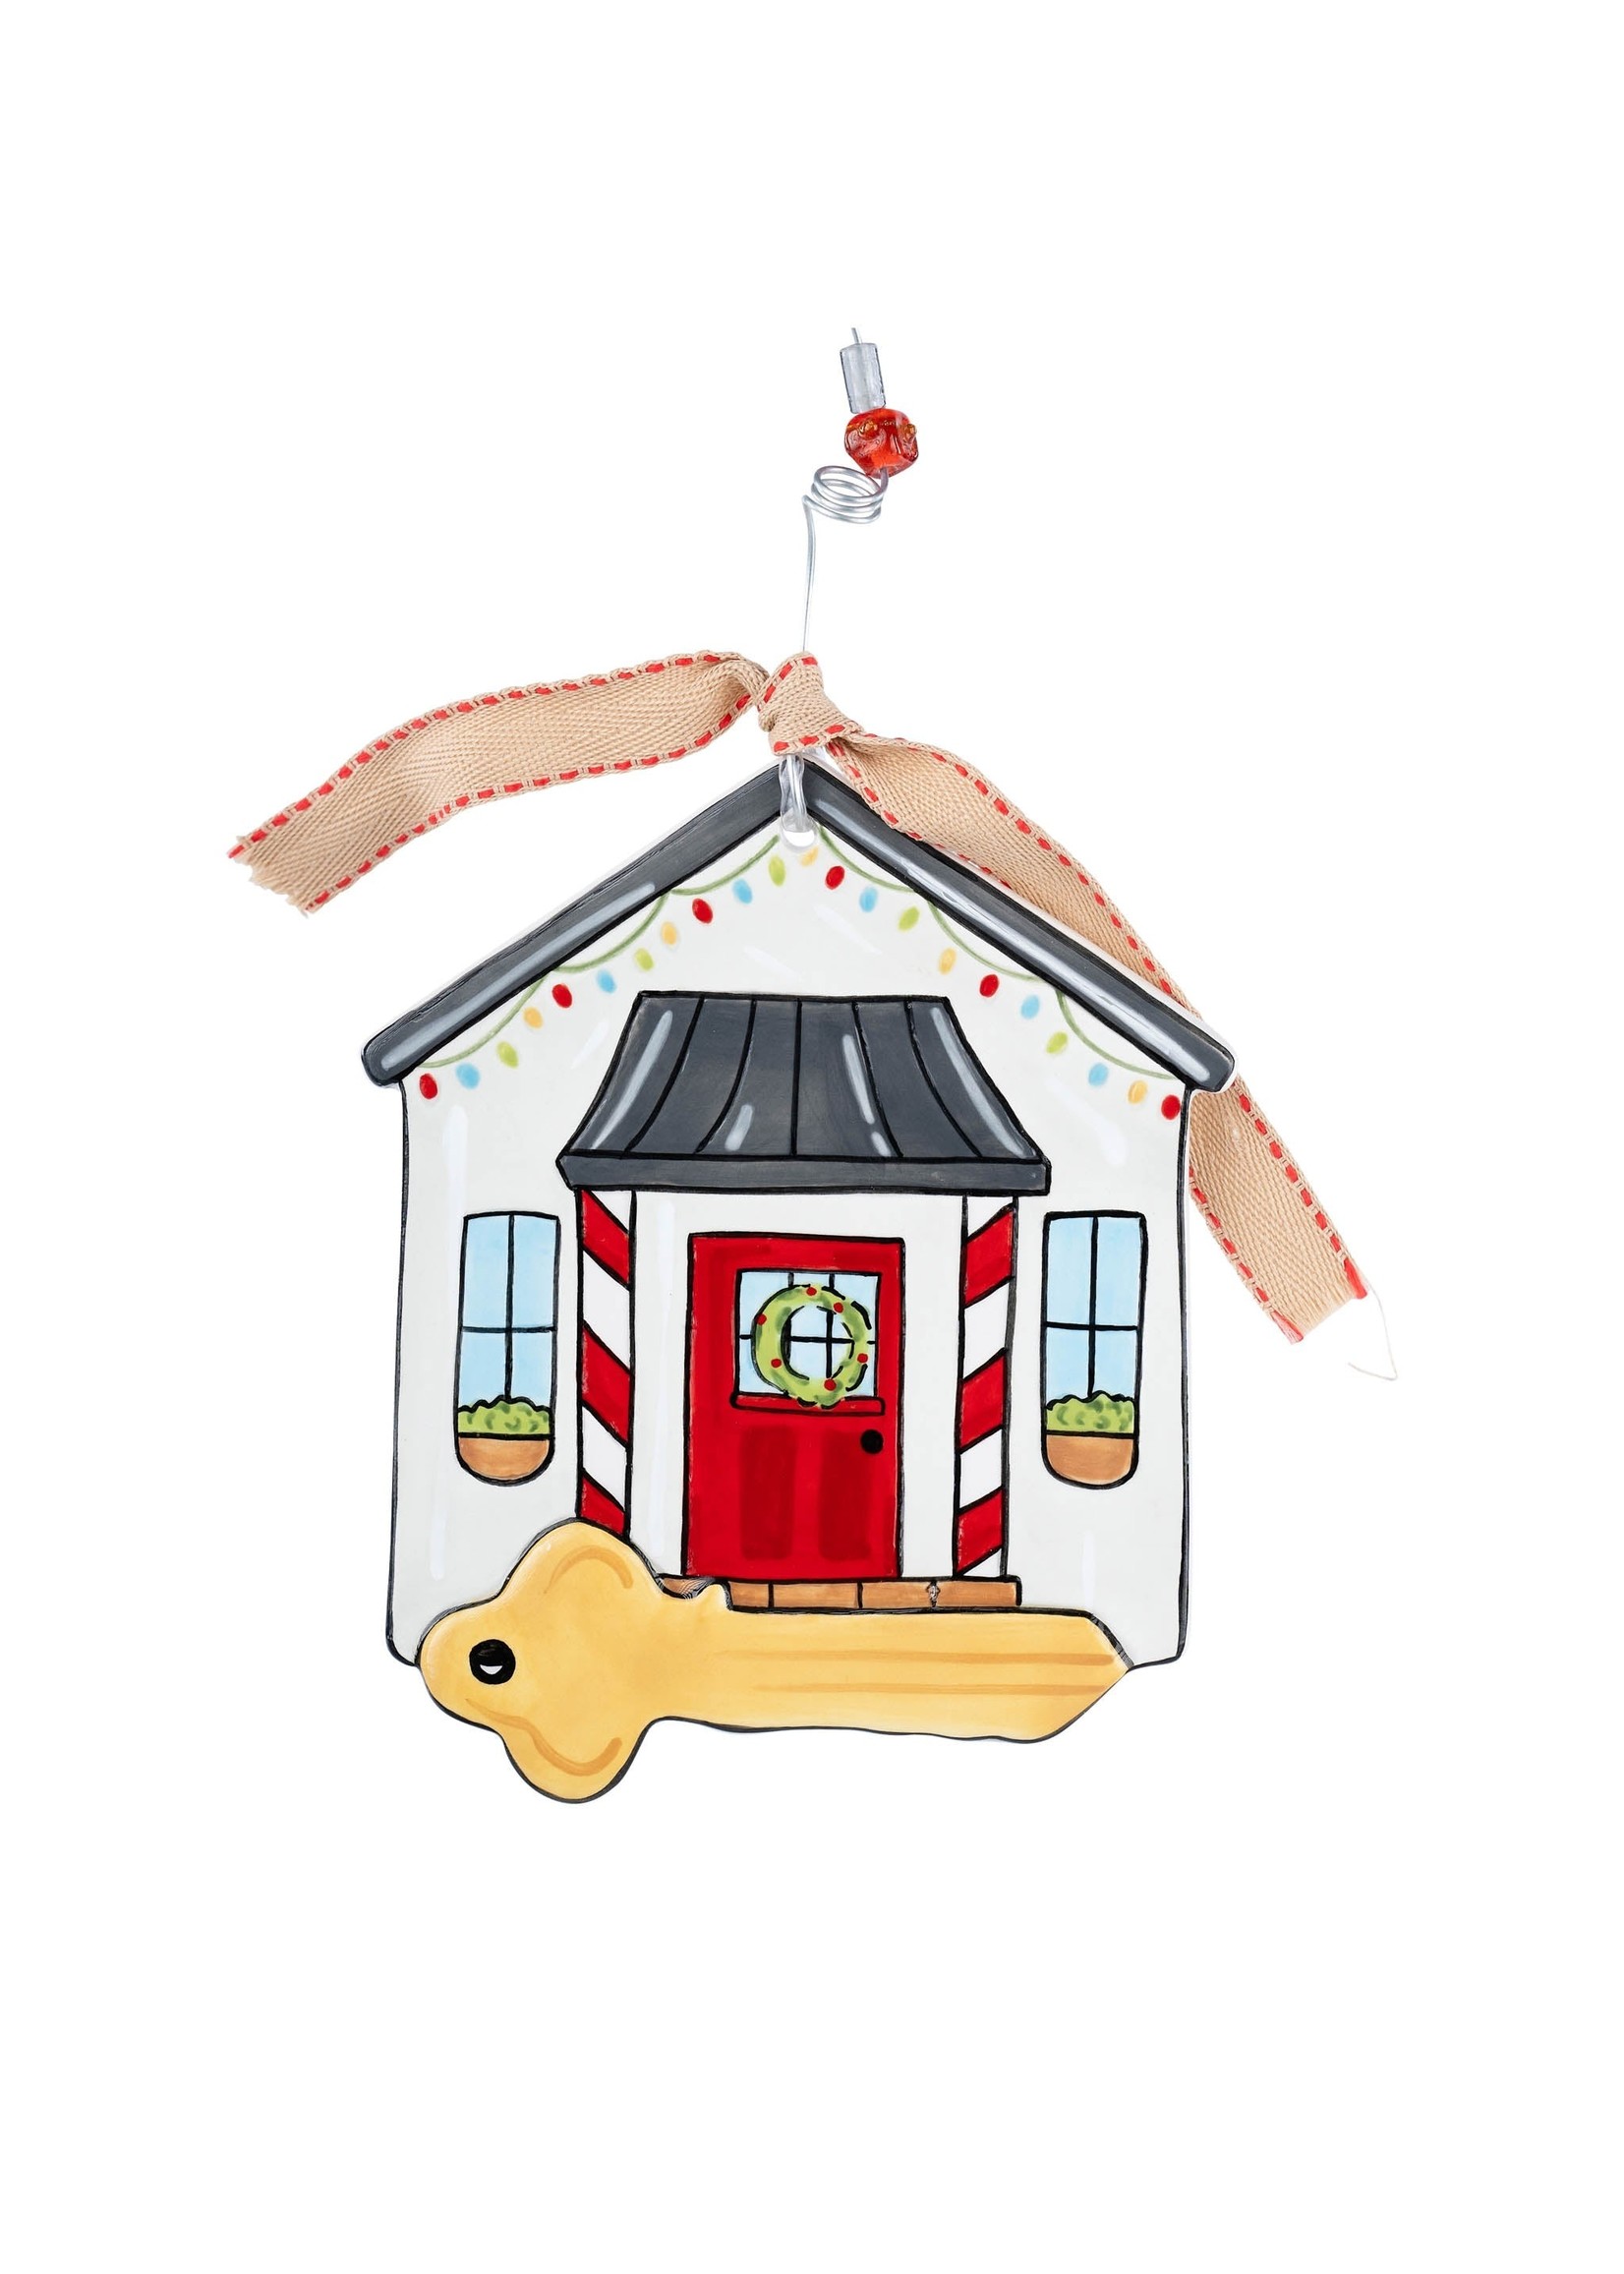 Glory Haus Personalizable New Home Key Ornament